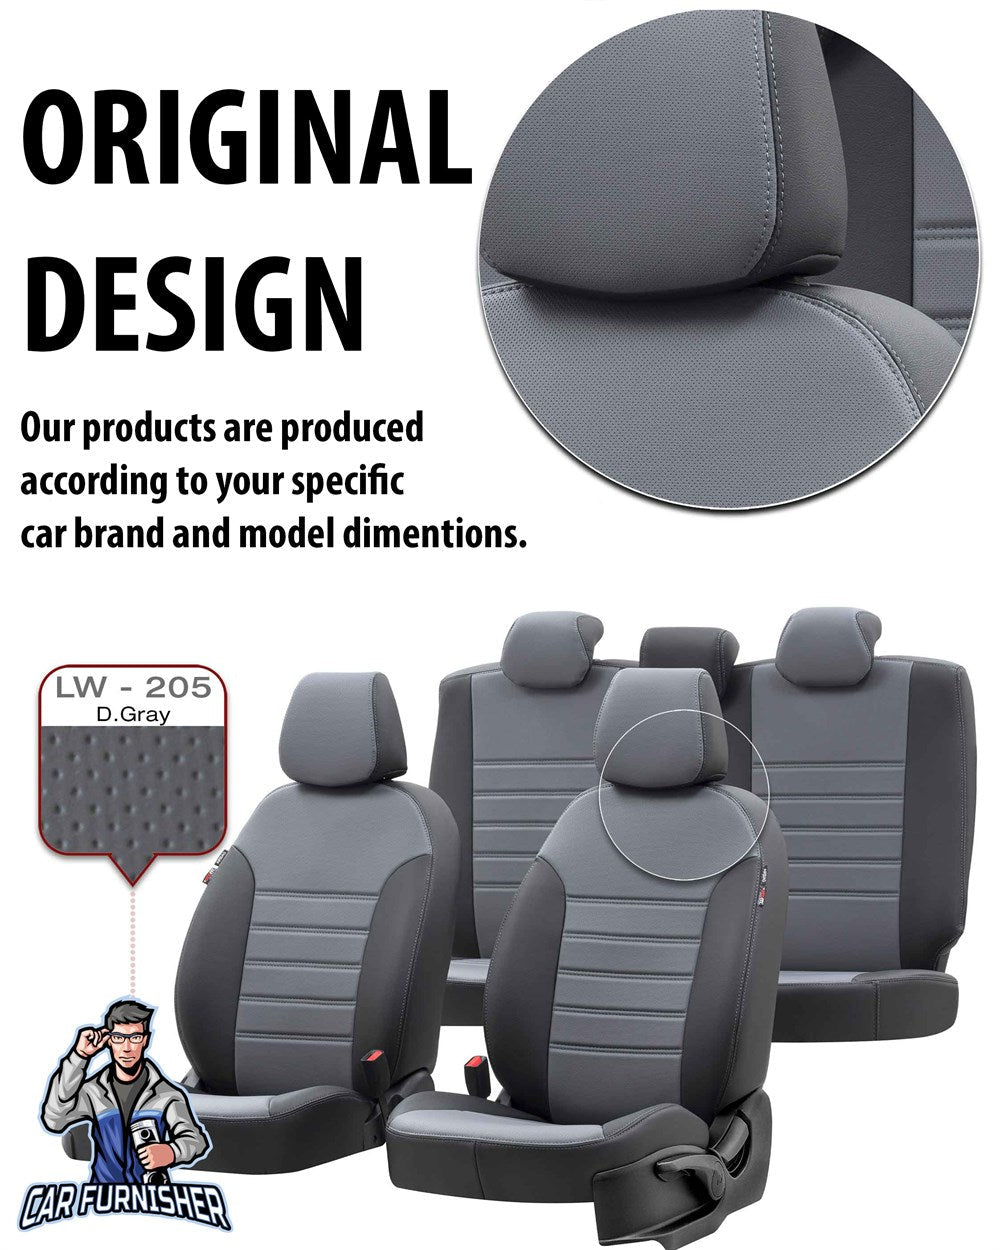 Fiat Marea Car Seat Covers 1996-2007 Istanbul Design Smoked Black Full Set (5 Seats + Handrest) Leather & Fabric